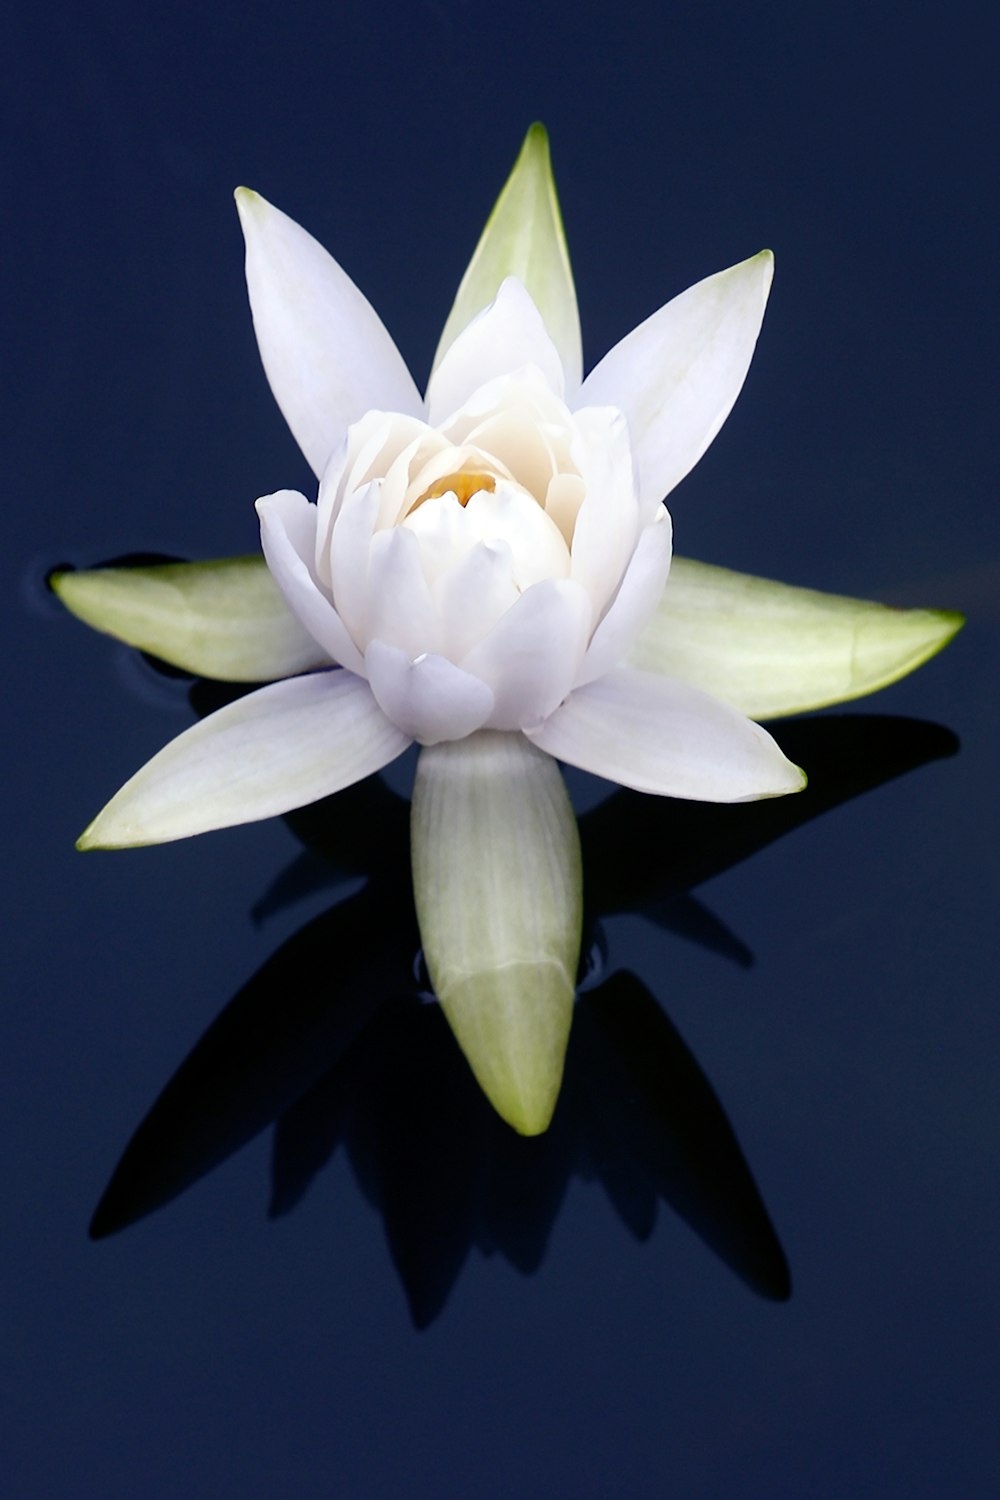 a white flower floating on top of a body of water